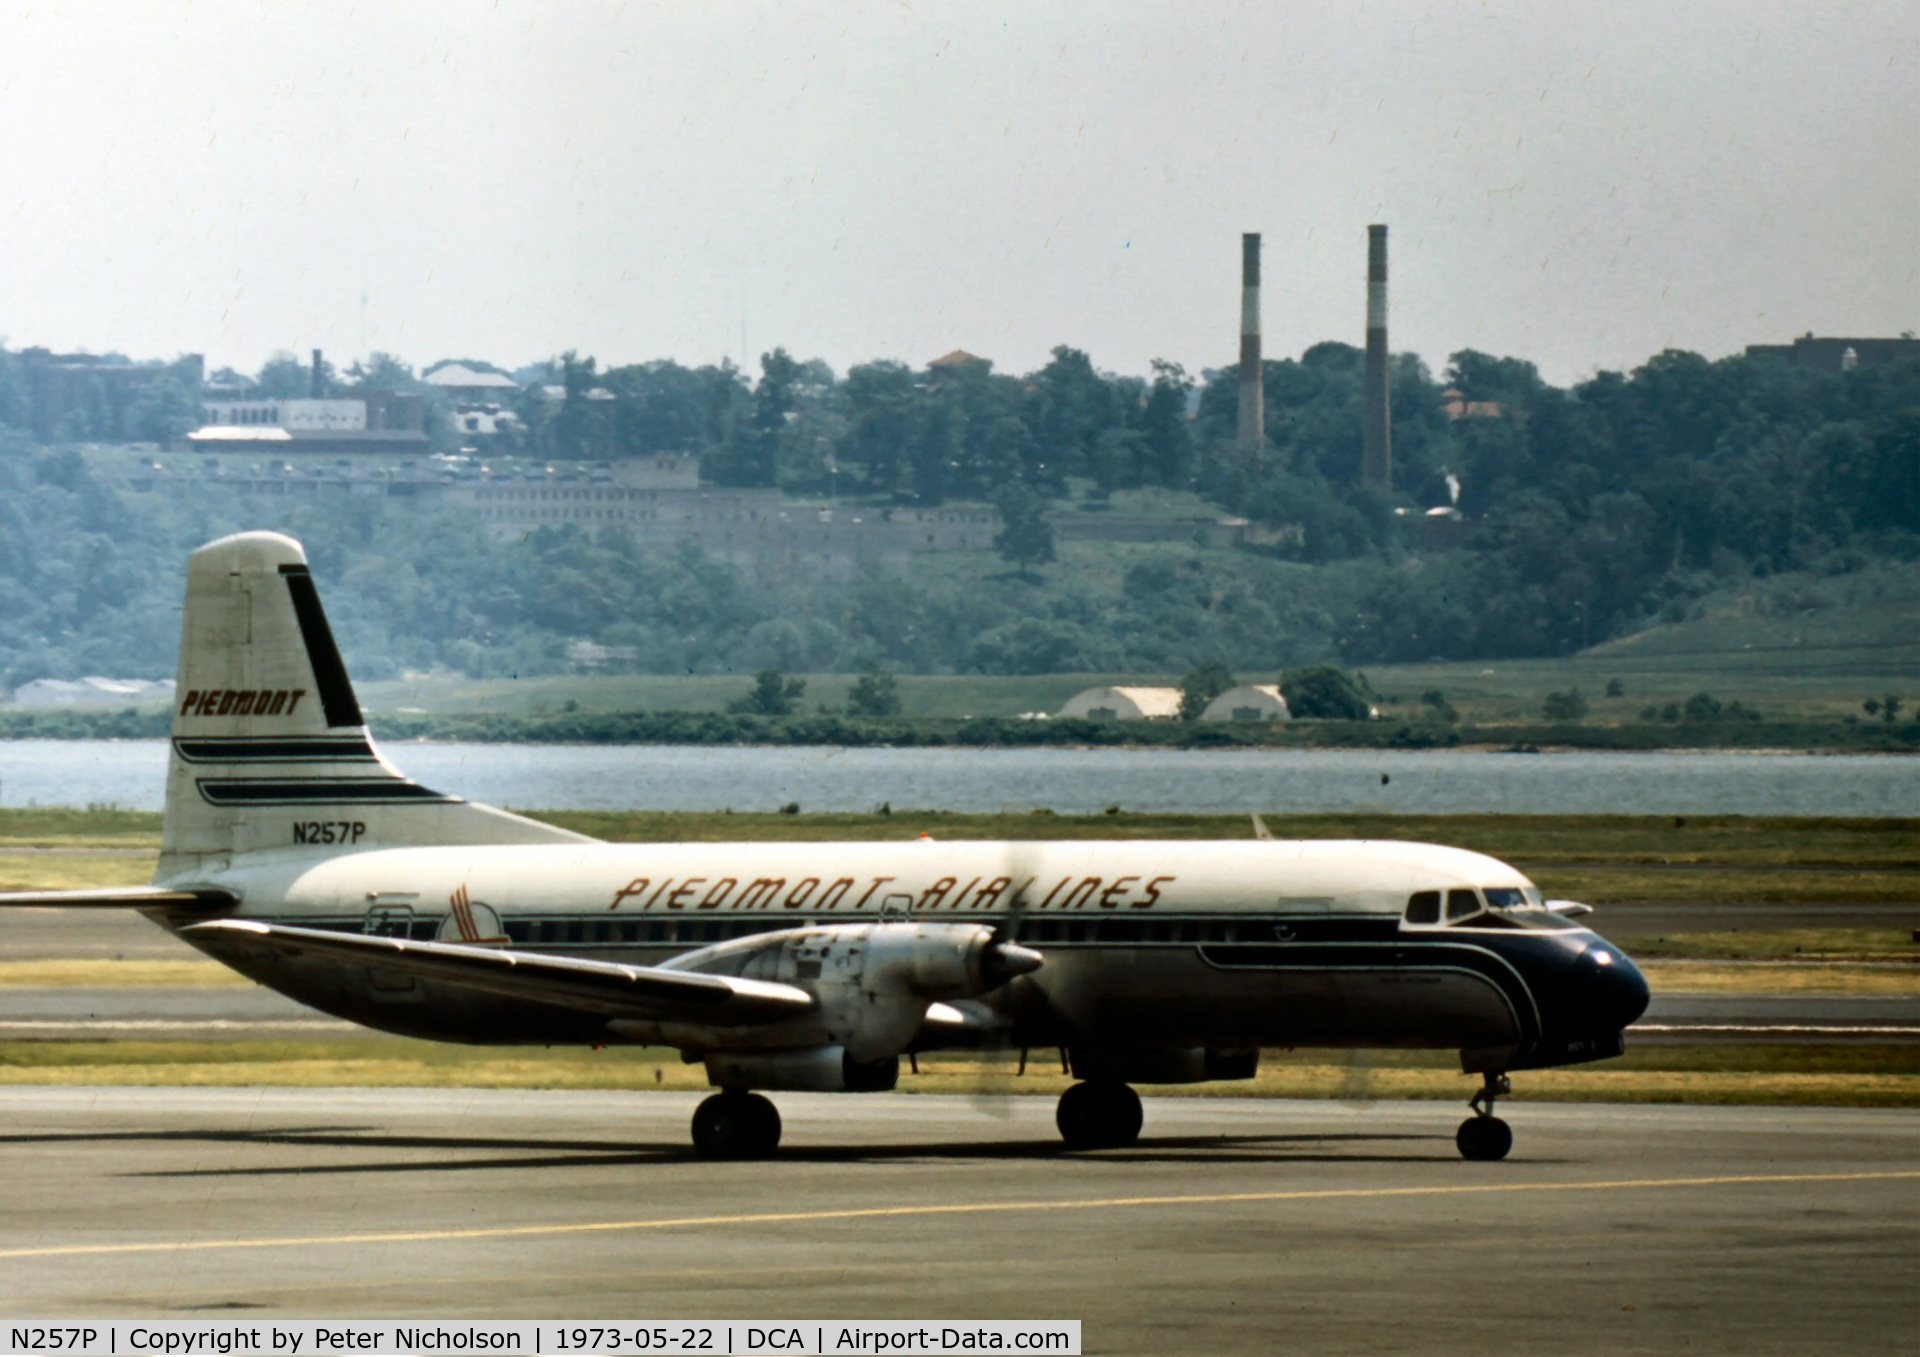 N257P, 1969 Nihon YS-11A-500 C/N 2118, Operated by Piedmont Airlines and named Santee Pacemaker - seen taxying at Washington National in the summer of 1973.